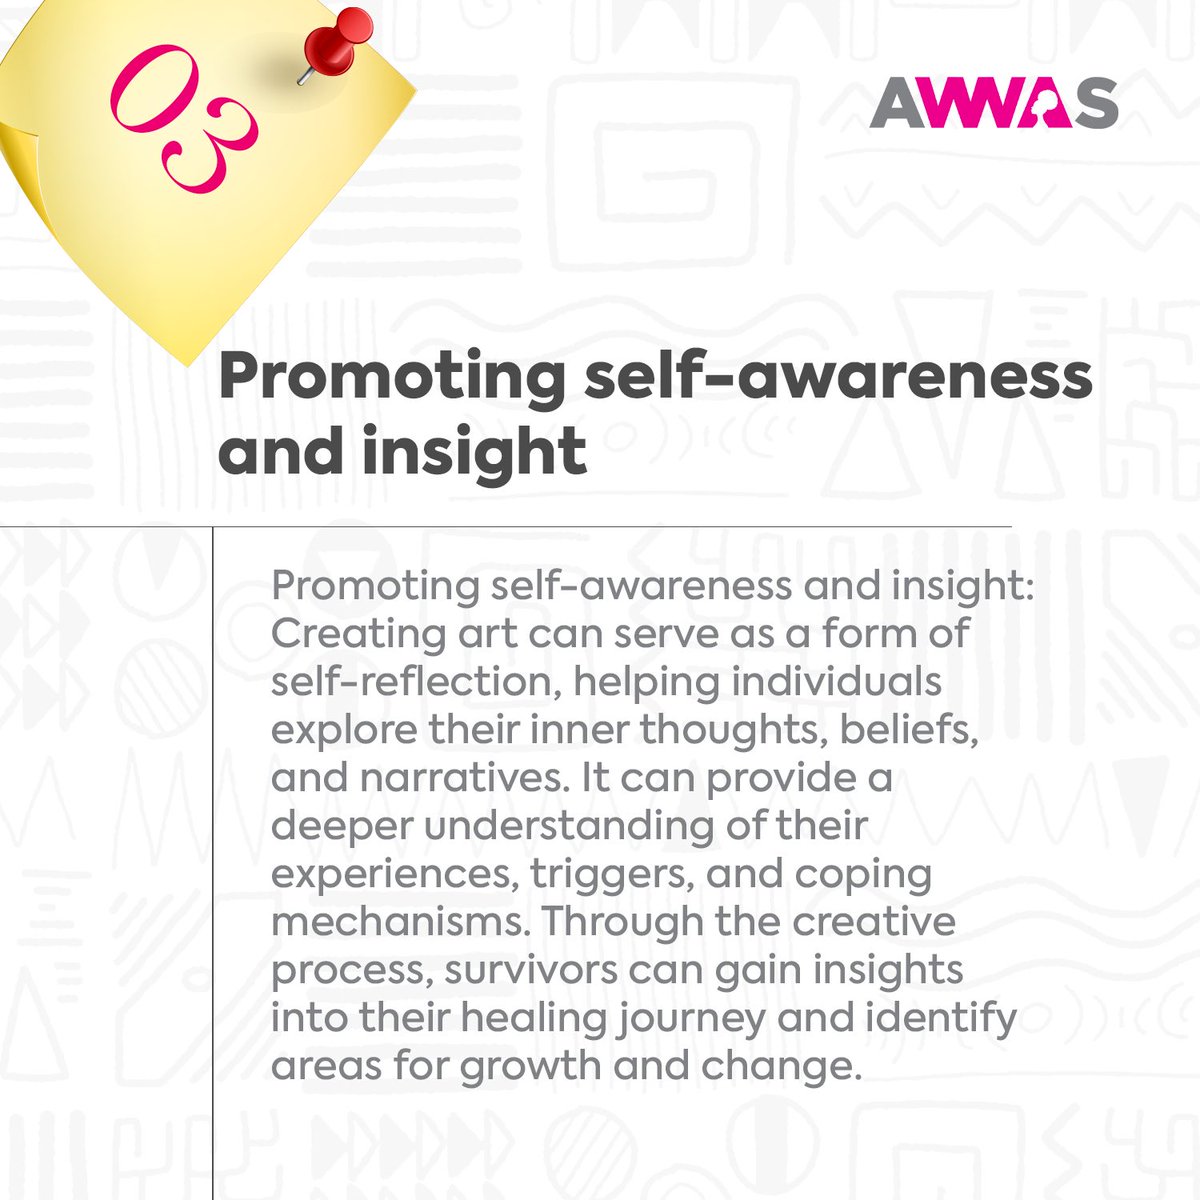 Did you know that creative therapy has incredible benefits for your overall well-being?
Swipe to see👉🏽
^
^
^
#awwas #thecircleuniabuja #creativetherapy #findyourvoice #madeforpurpose #women #stopabuse